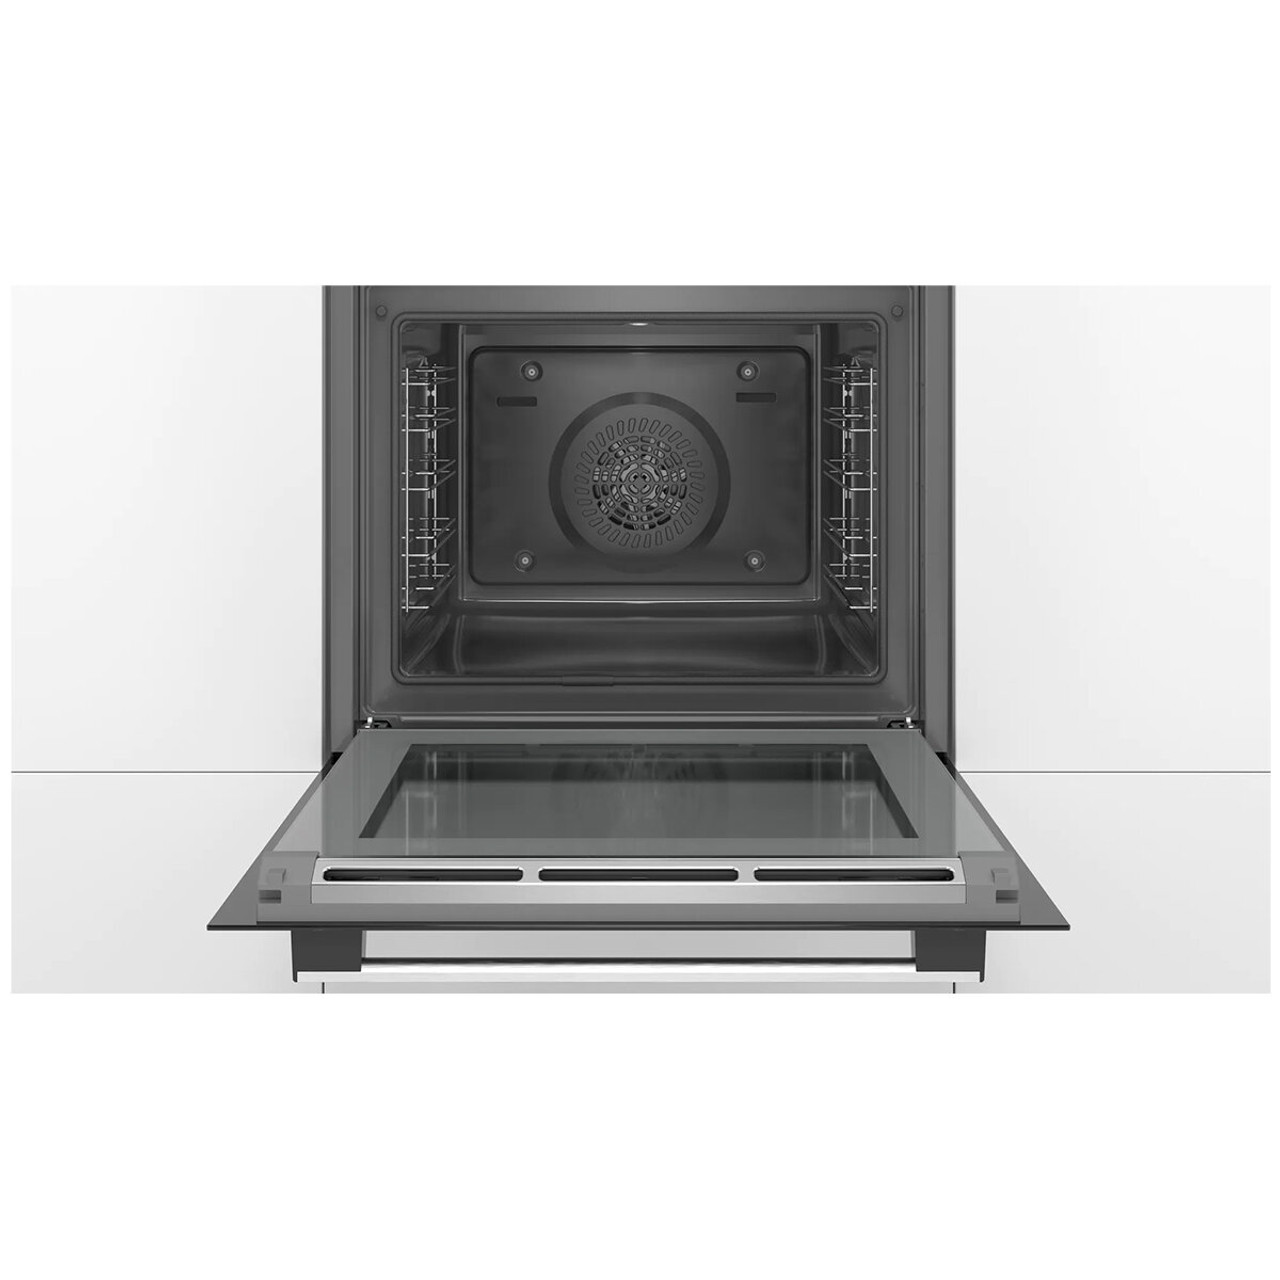 Bosch Series 4 Built-in Pyrolytic Oven Black